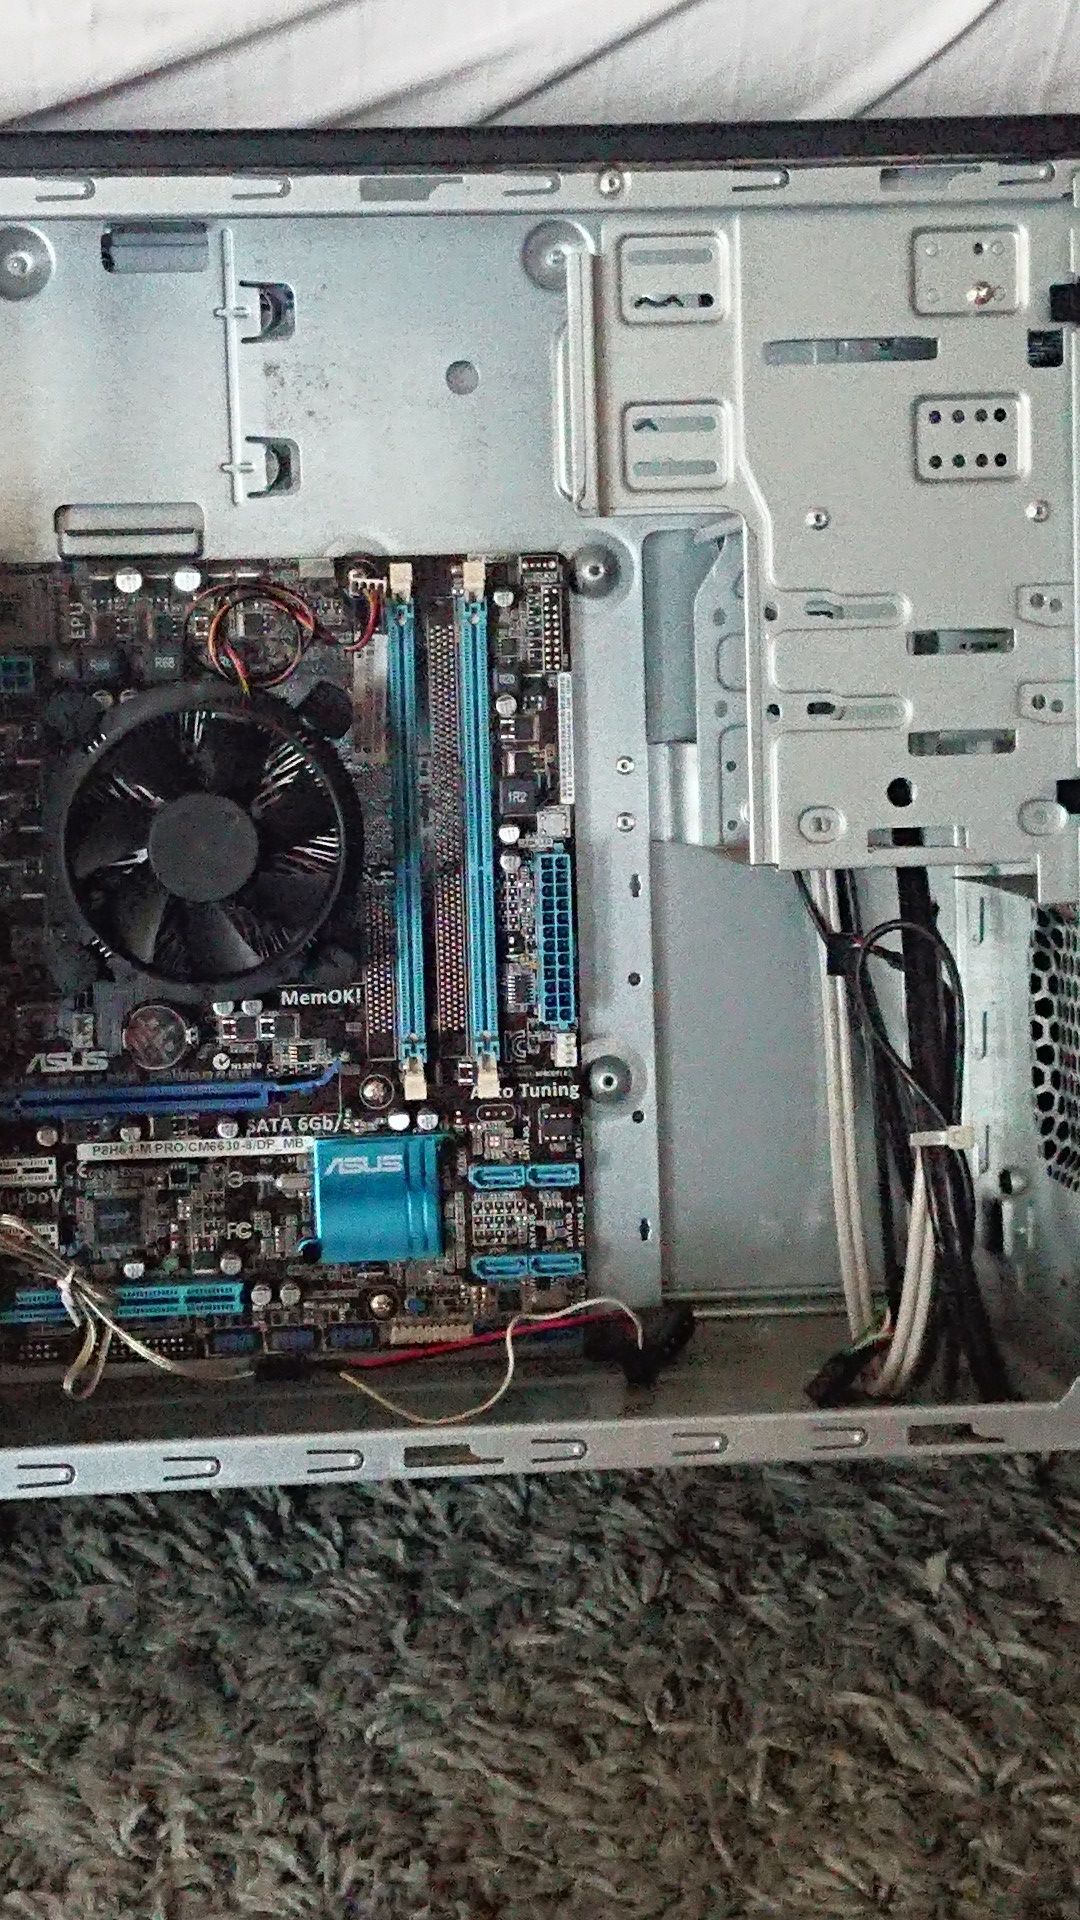 Mother board, i5 processor... And tower pc